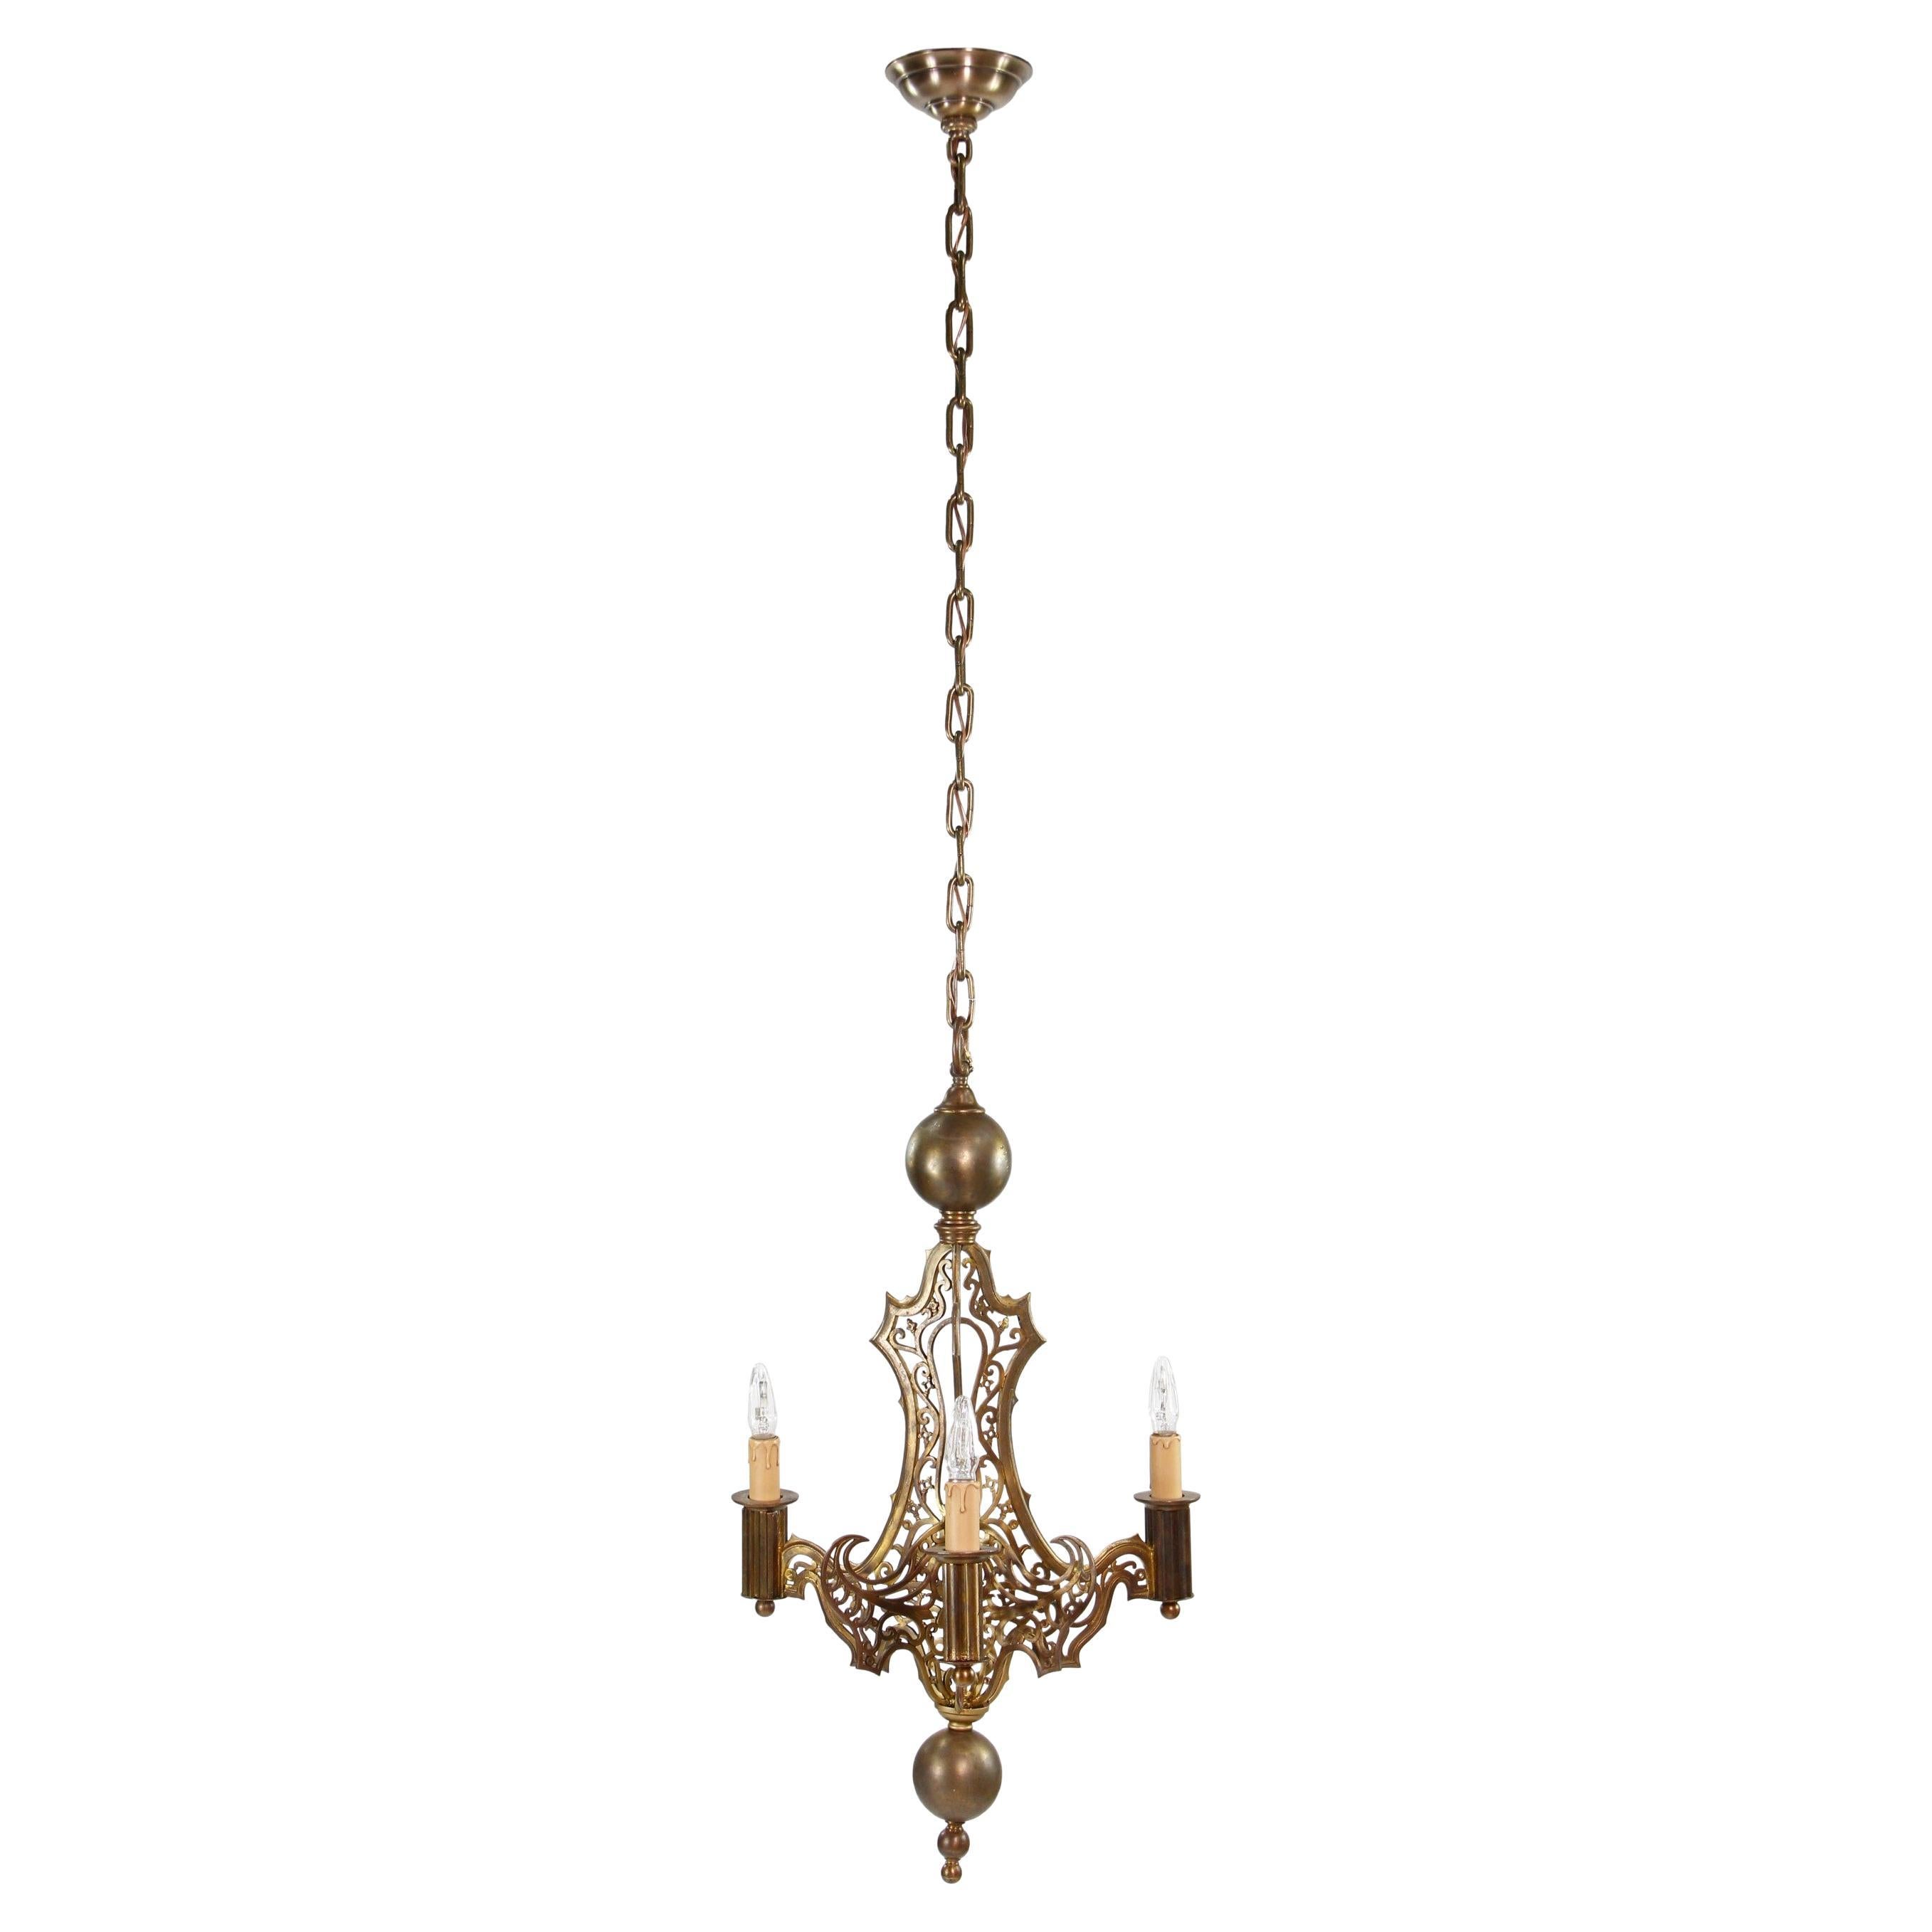 Restored Antique Ornate Bronze Gothic 3 Arm Chandelier Qty Available For Sale